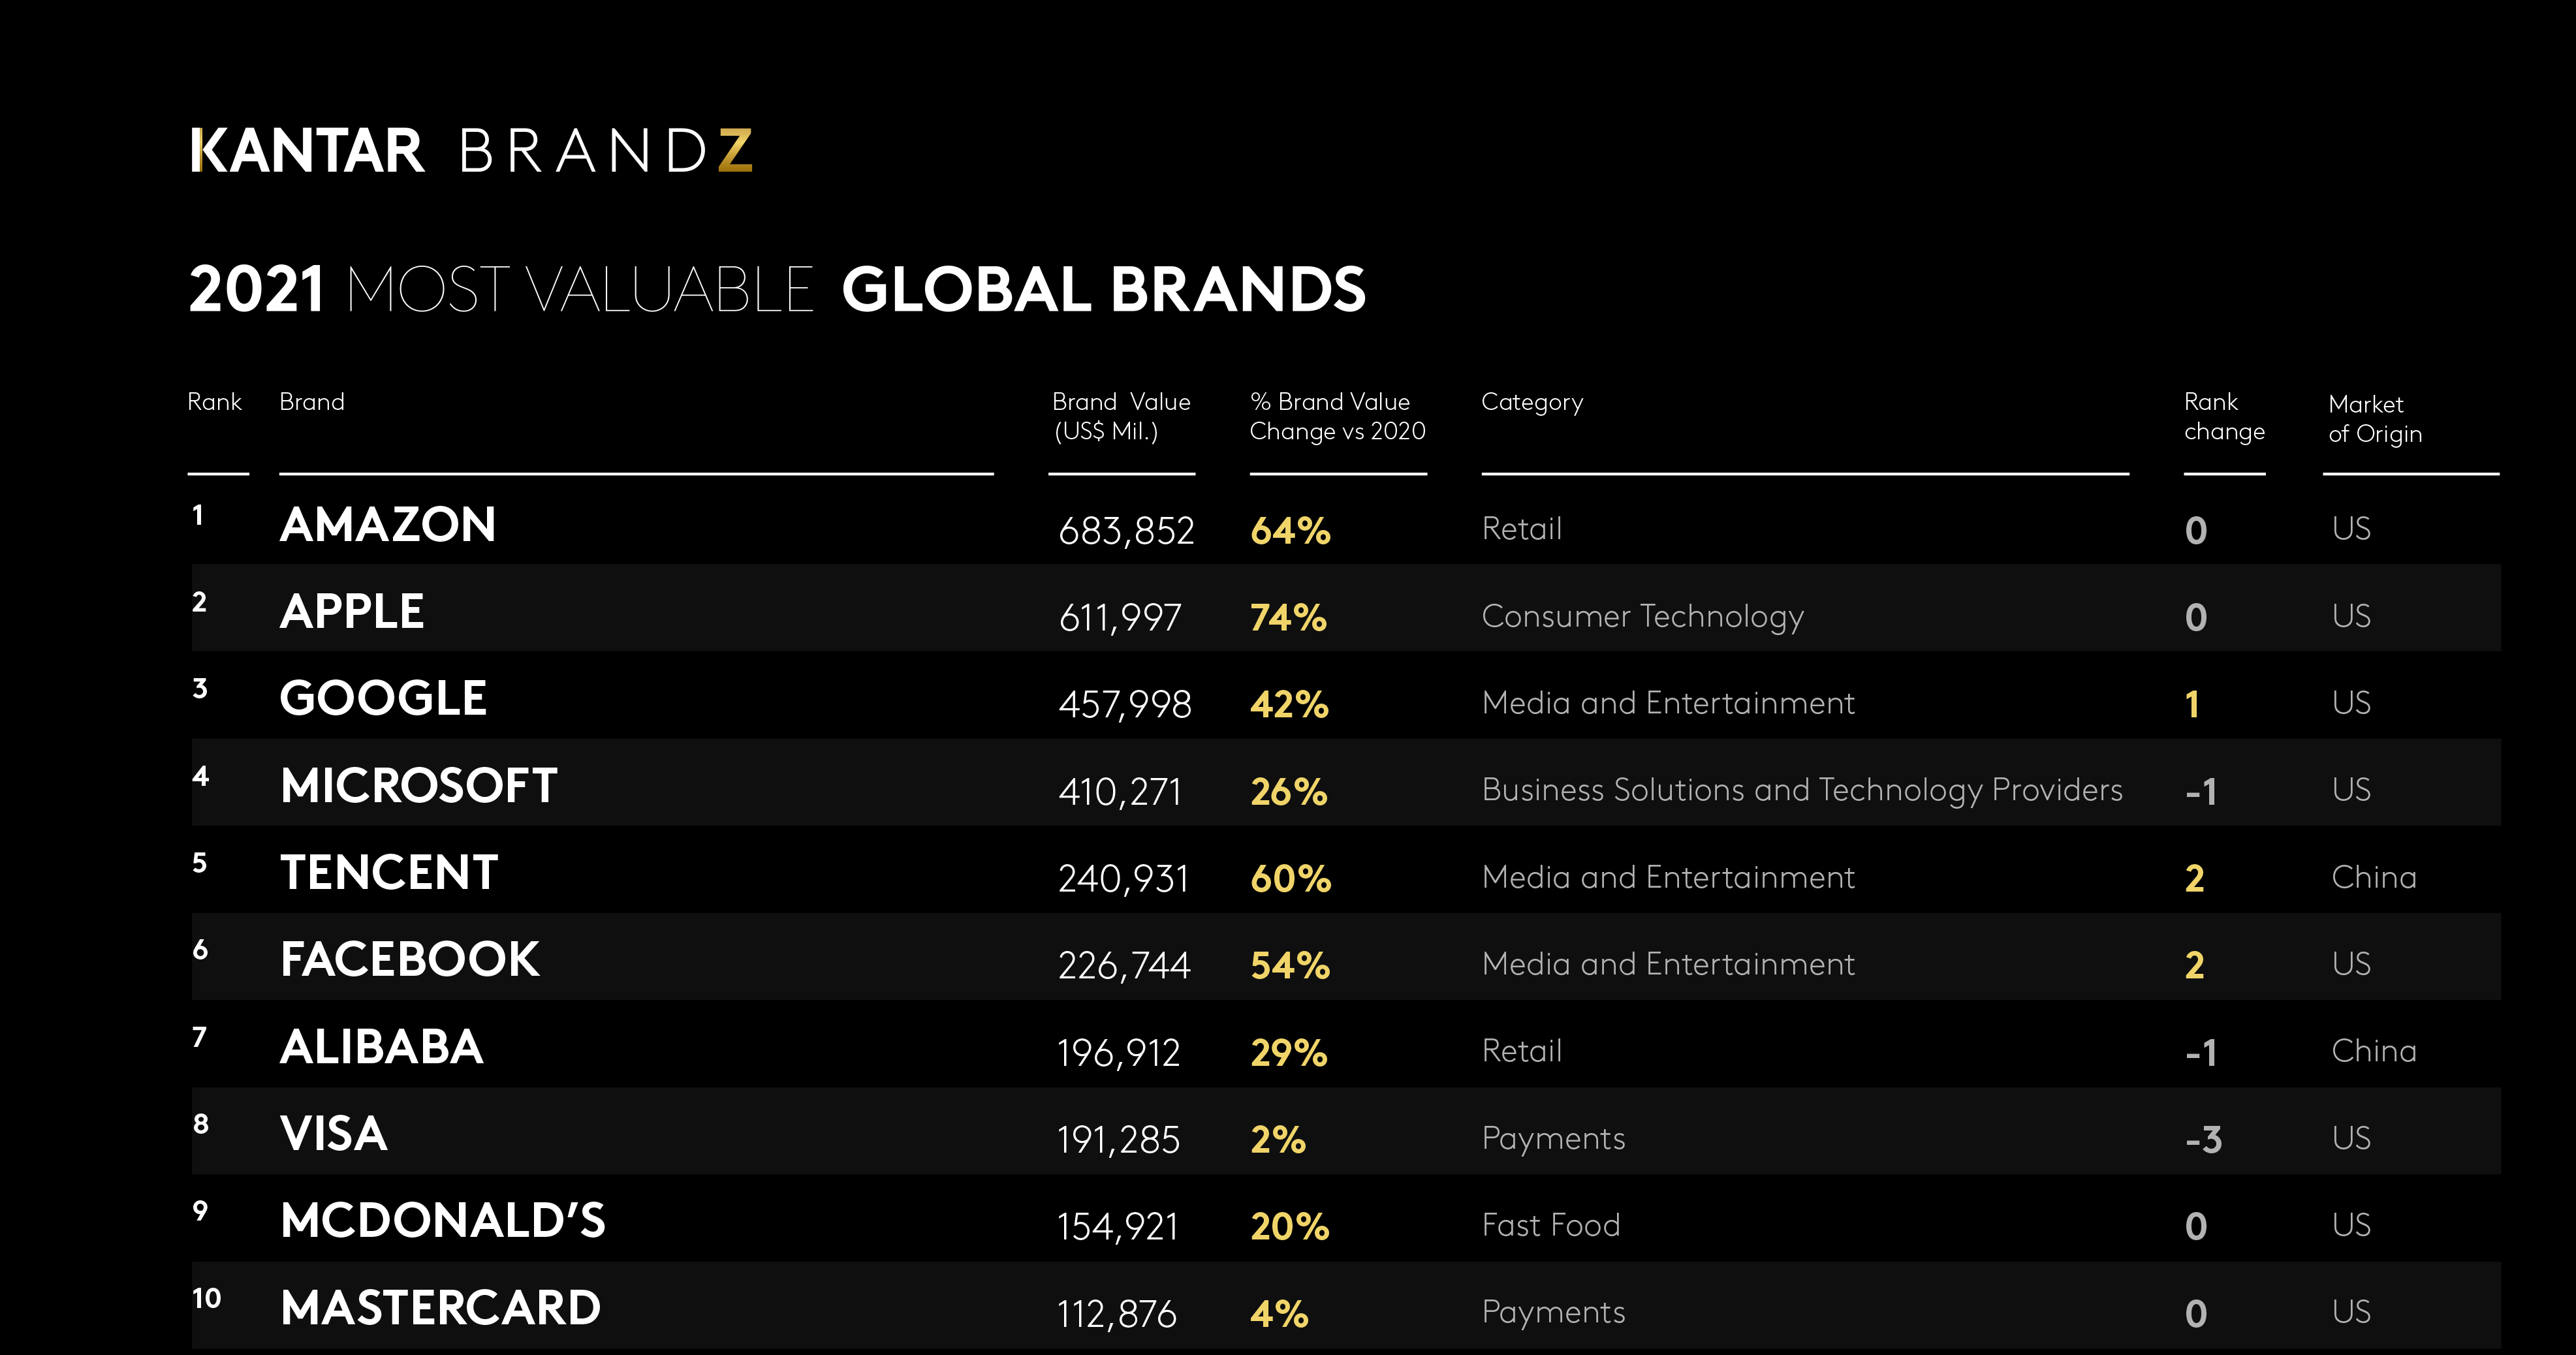 France's top brands increase their value by a third since 2021